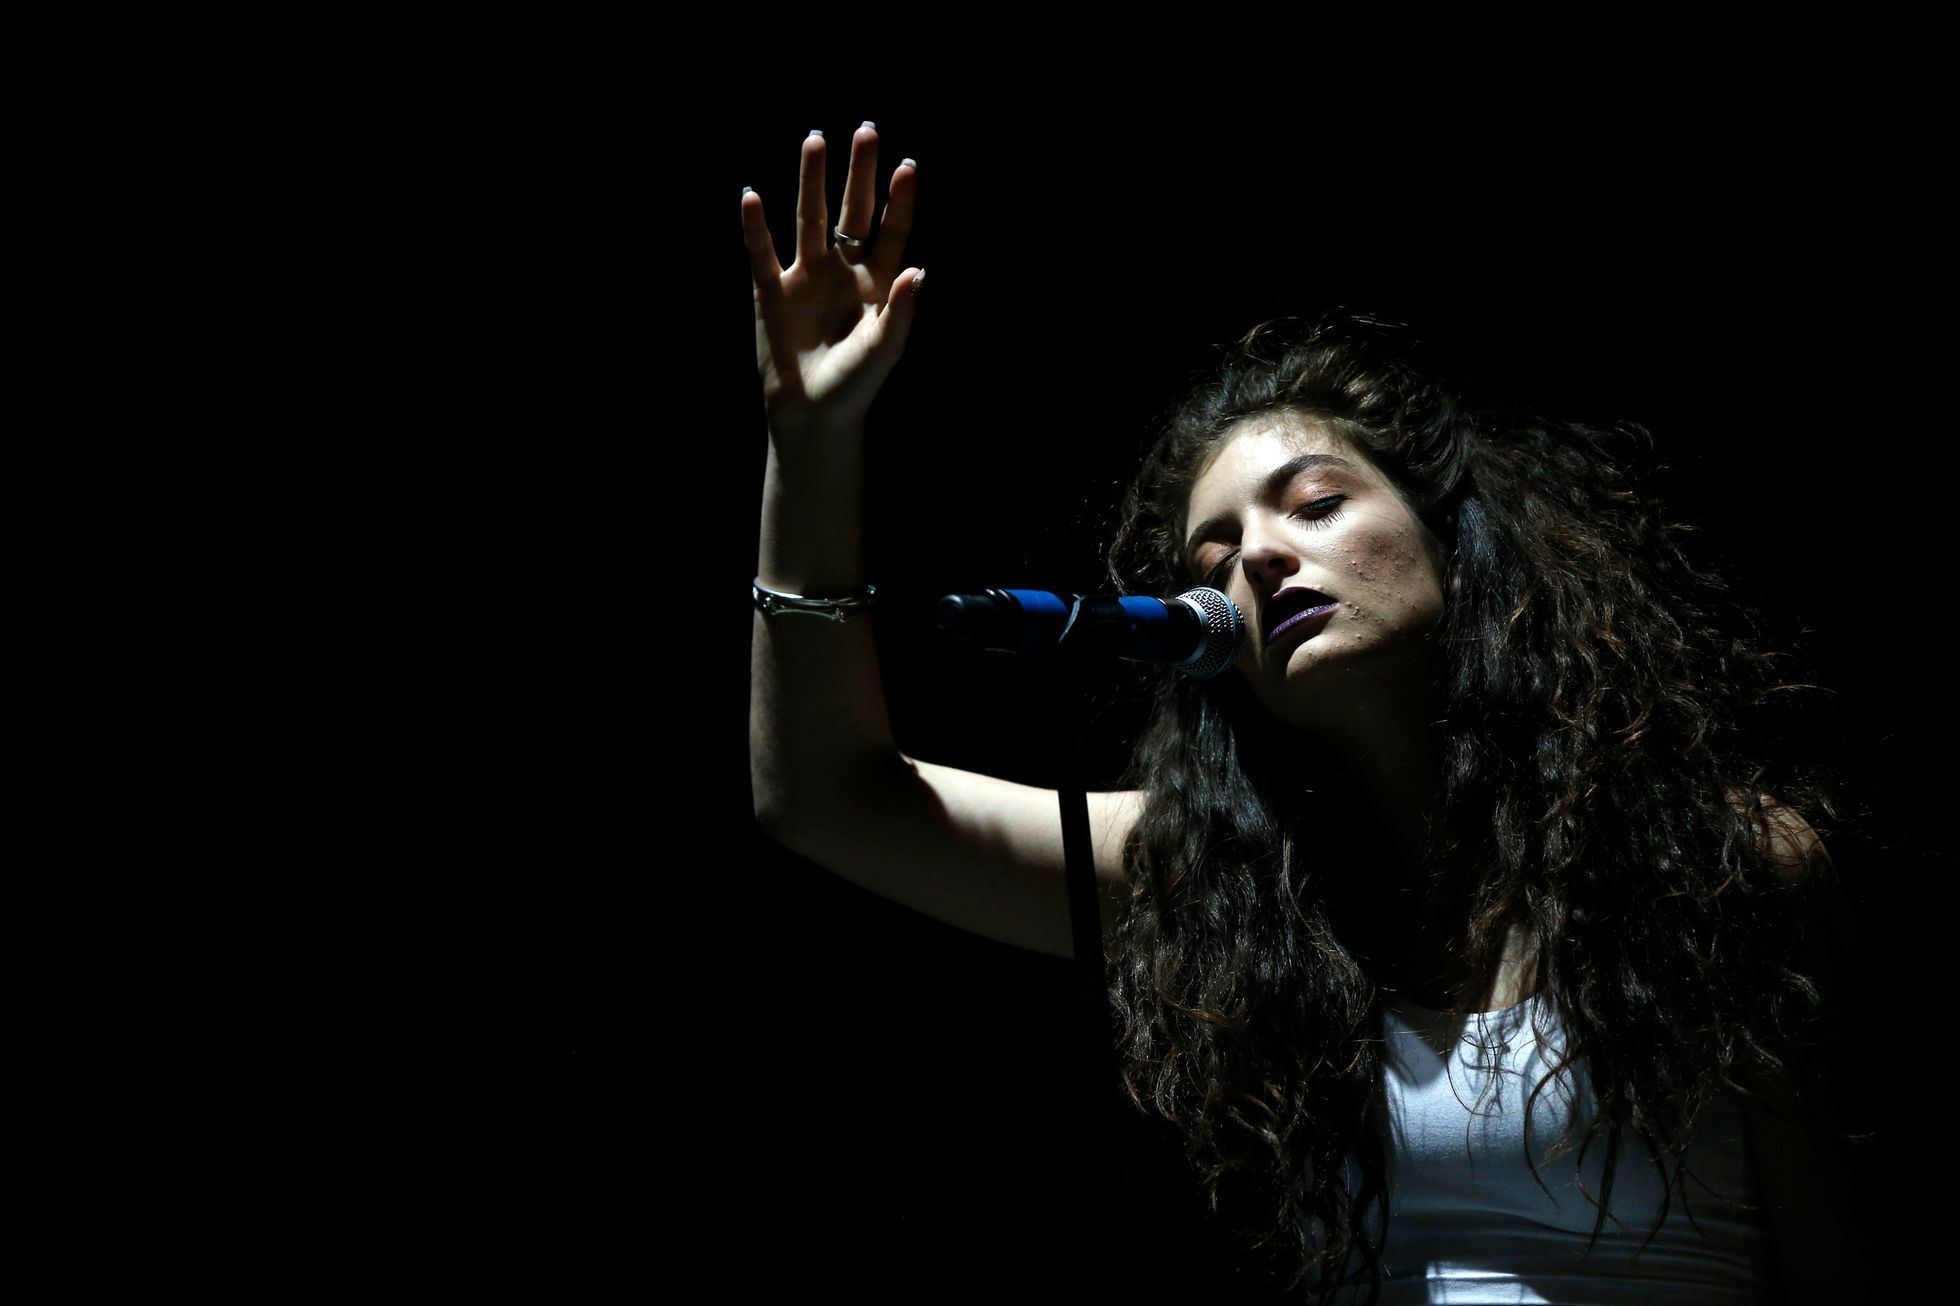 New Zealand singer-songwriter Lorde performs at the Coachella Valley Music and Arts Festival in Indio